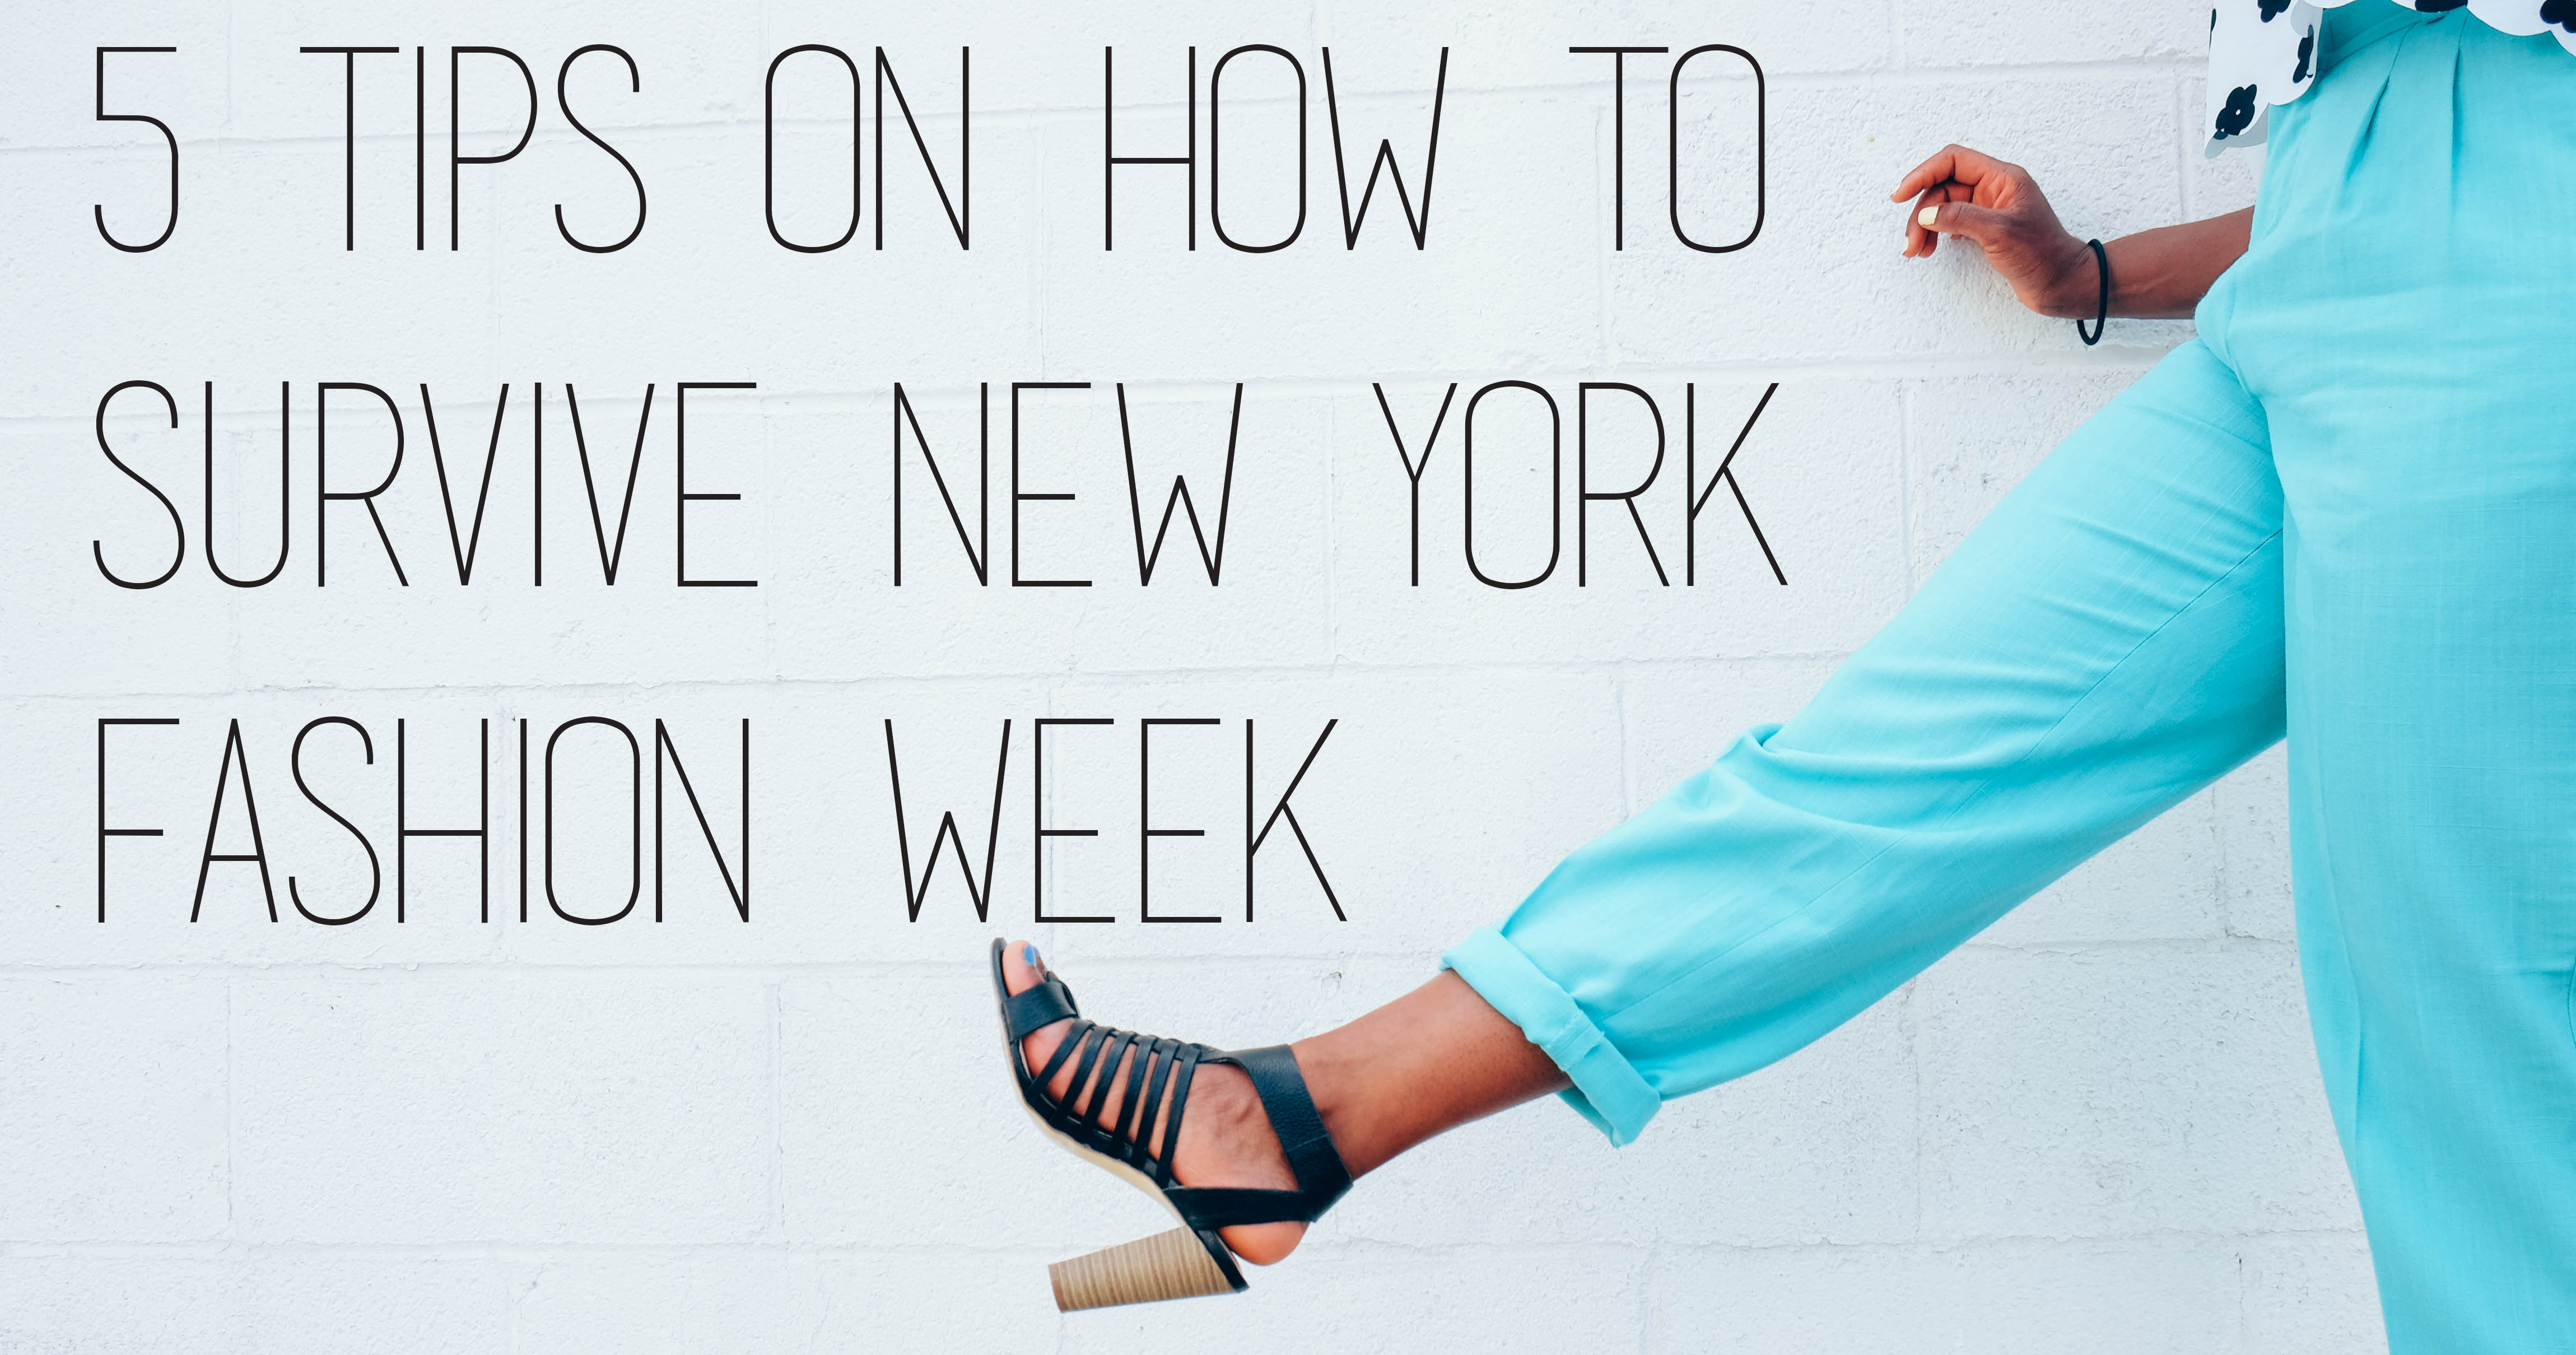 5 Tips on How to Survive New York Fashion Week